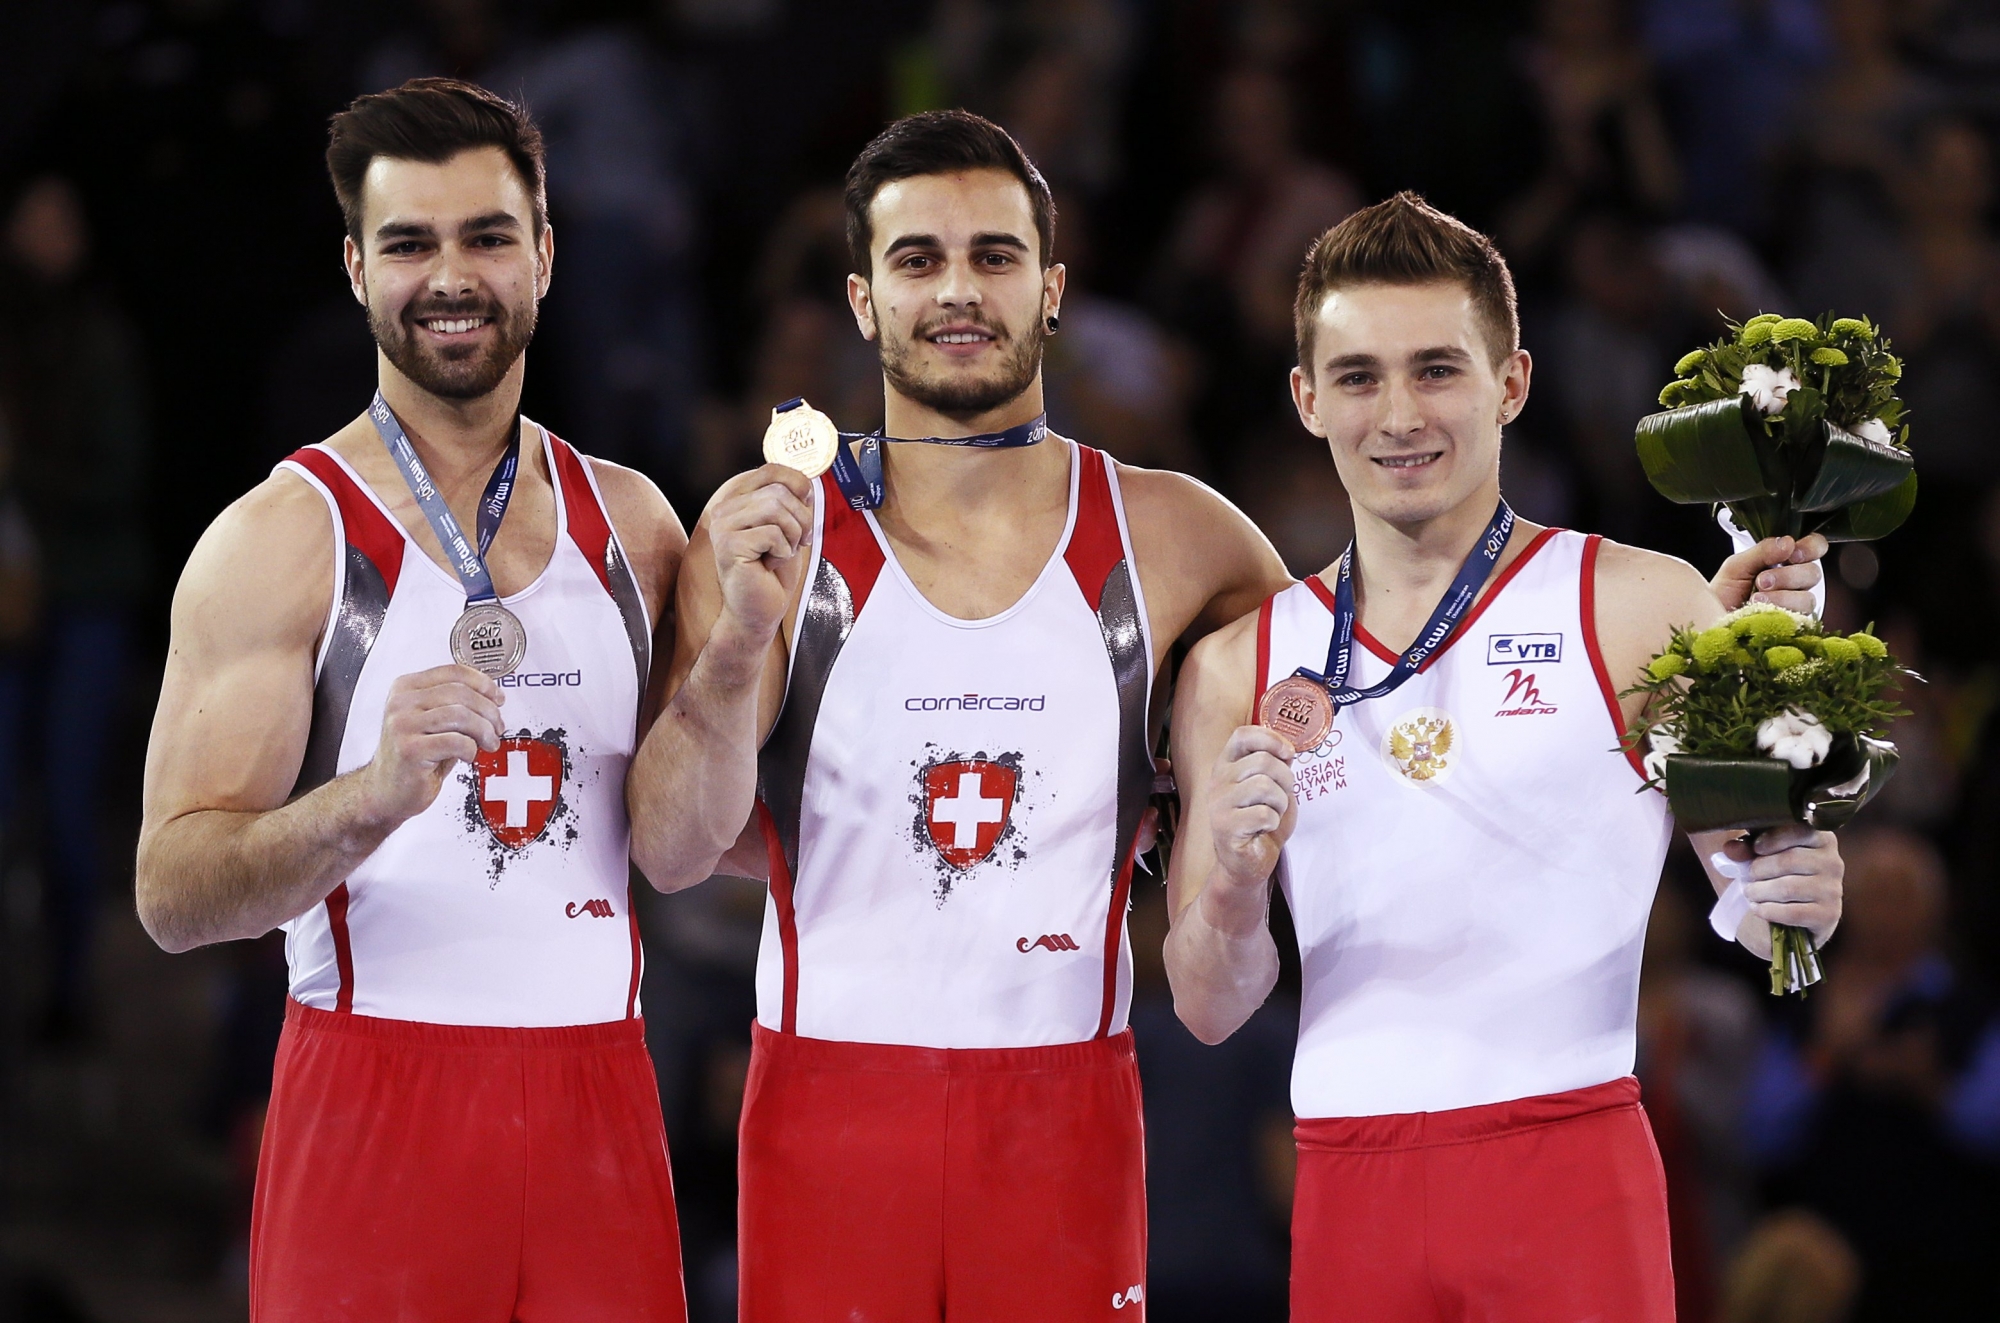 epa05923627 Pablo Braegger of Switzerland (C) poses with his gold medal on the podium after winning the men's high bar final during the 2017 Artistic Gymnastics European Championships at the Polivalenta Sports Hall in Cluj-Napoca, Romania, 23 April 2017. Braegger won ahead of second placed Oliver Hegi of Switzerland (L) and third placed David Belyavskiy (R) of Russia.  EPA/ROBERT GHEMENT ROMANIA EUROPEAN ARTISTIC GYMNASTICS CHAMPIONSHIPS